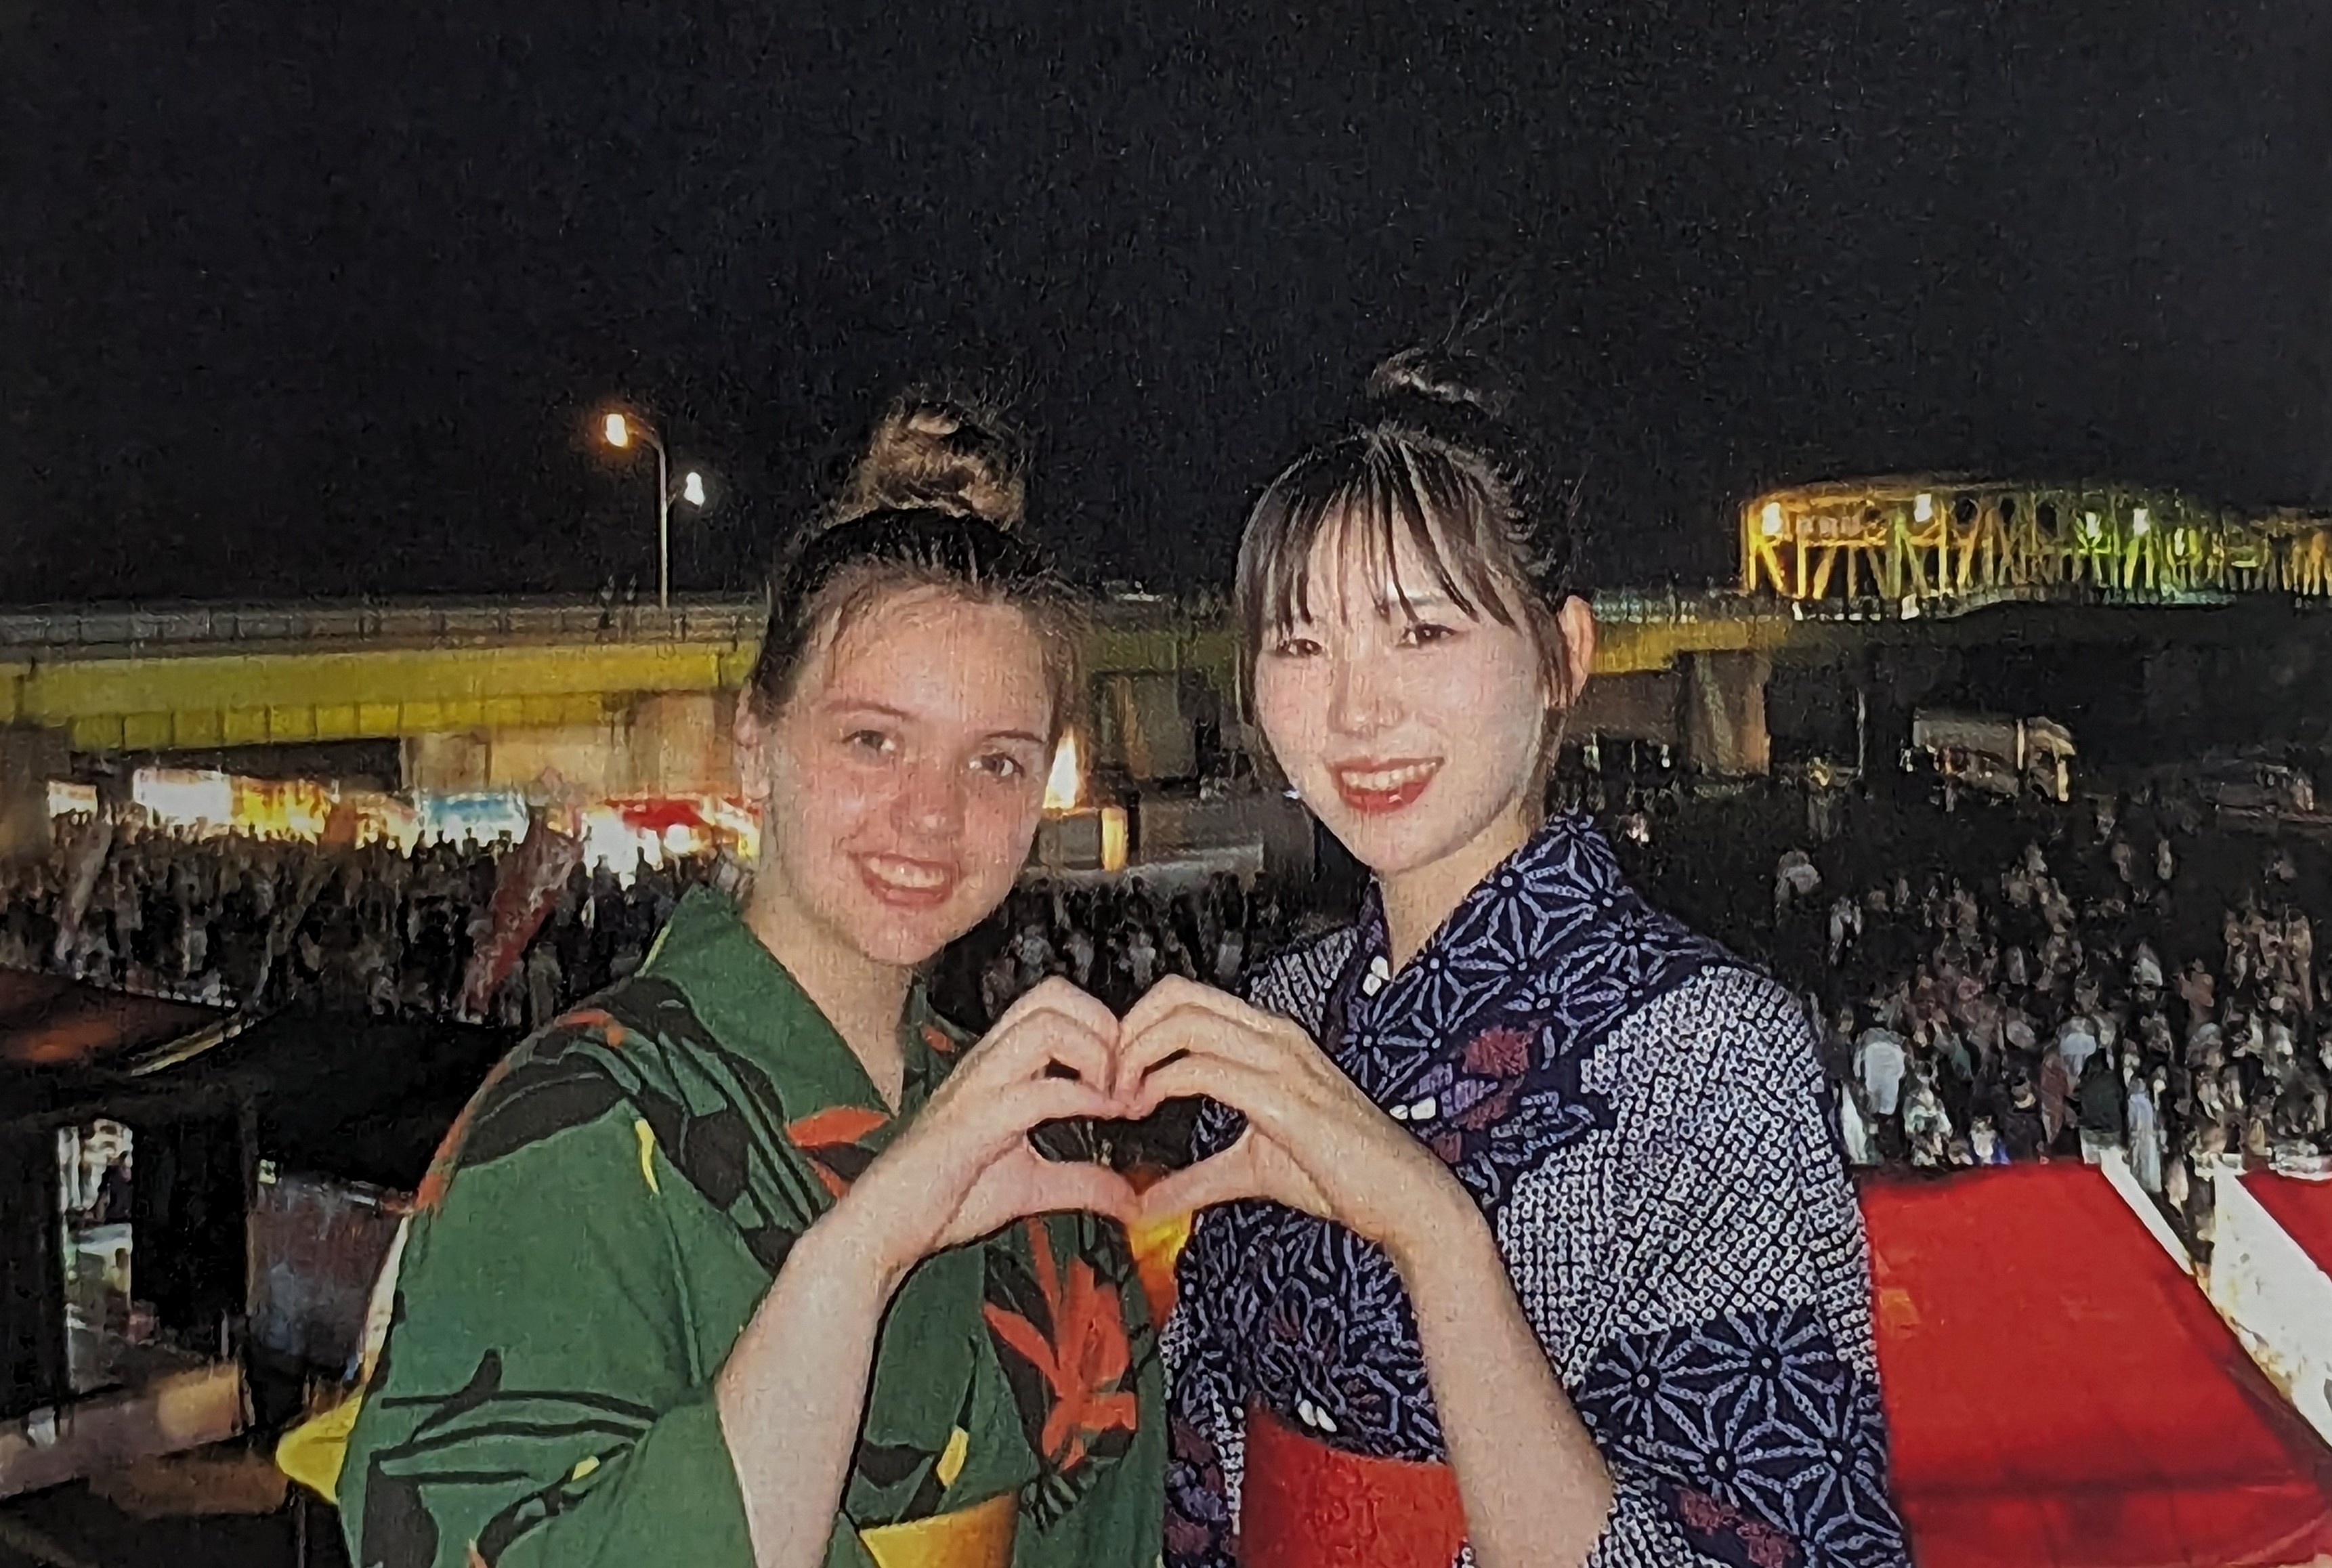 A young American girl with her Japanese friend making a heart with their hands.